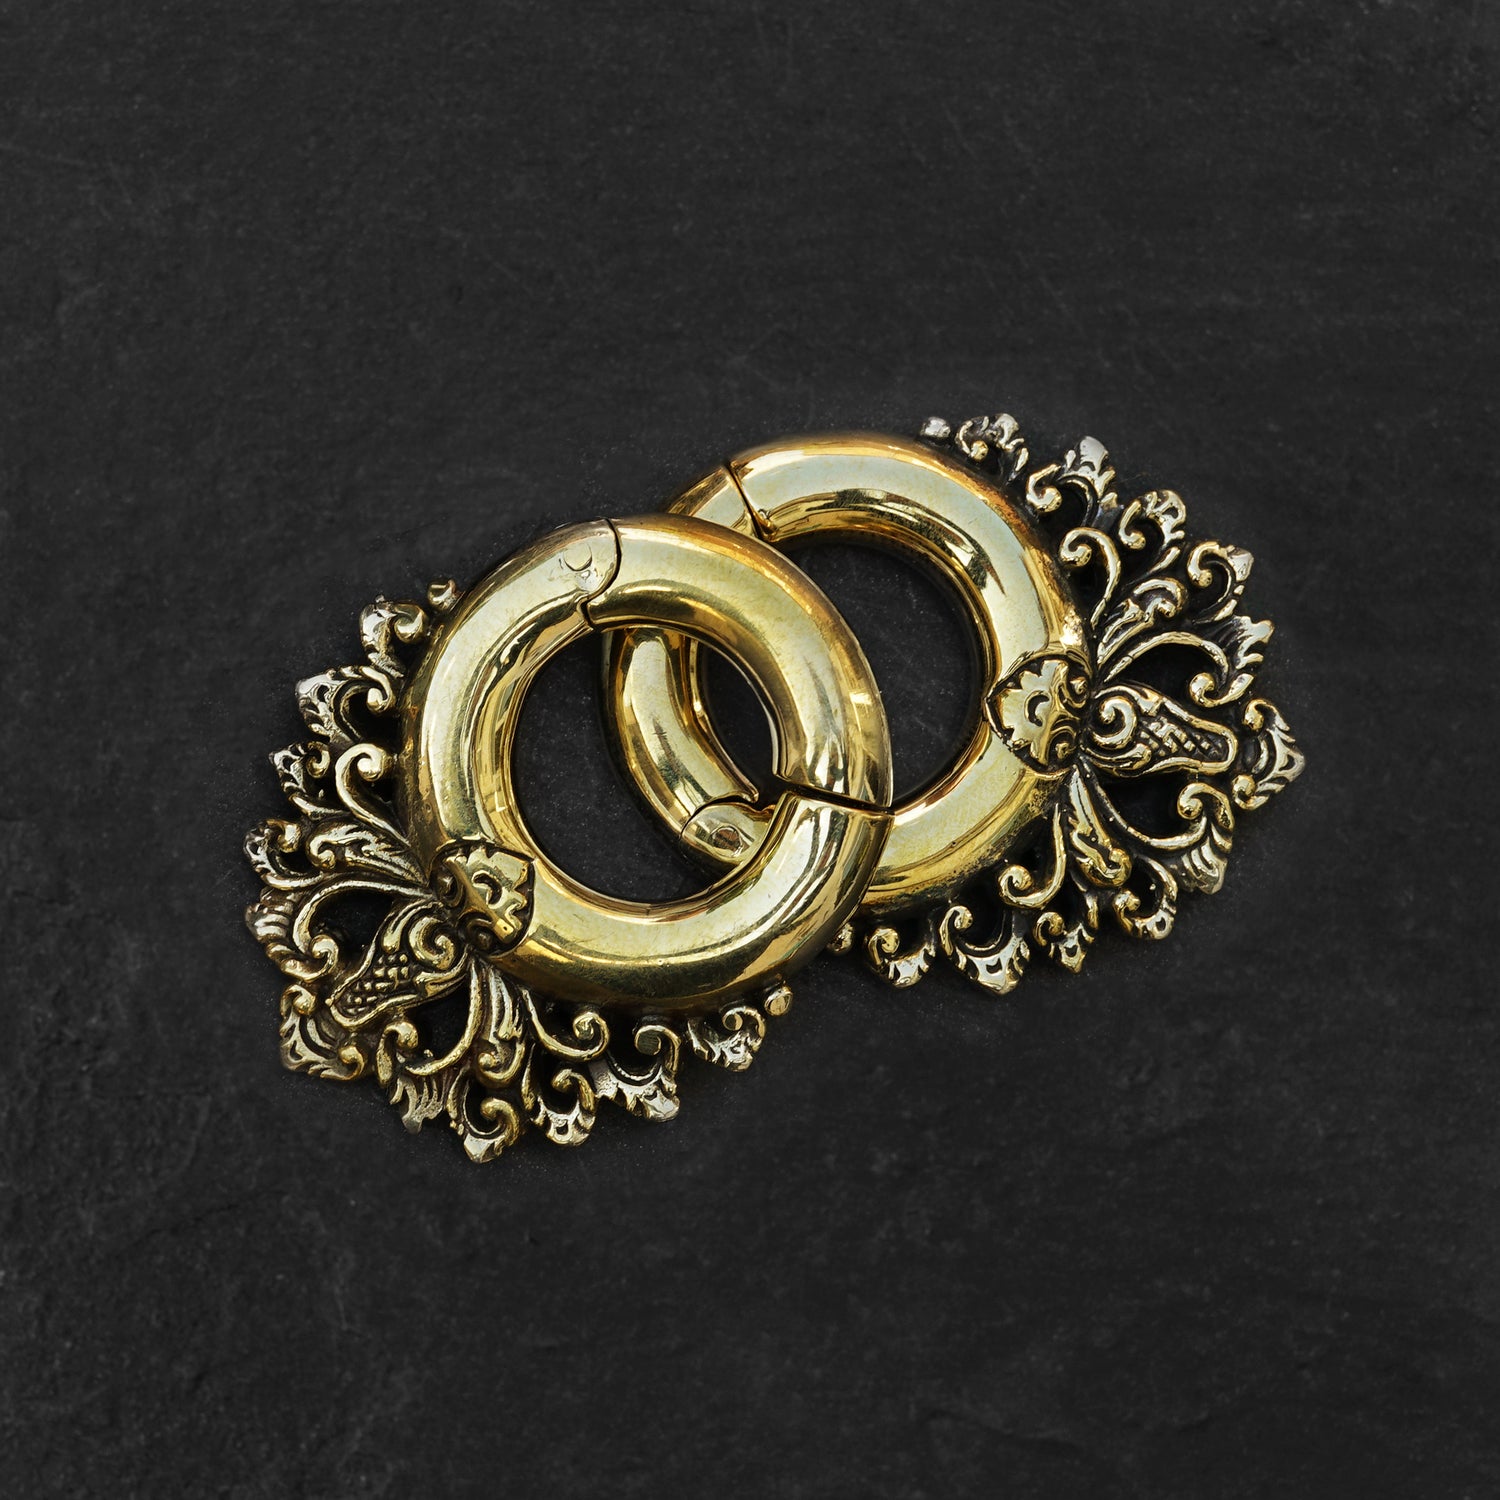 pair of gold brass ear hangers hoops with floral victorian design frontal view black background